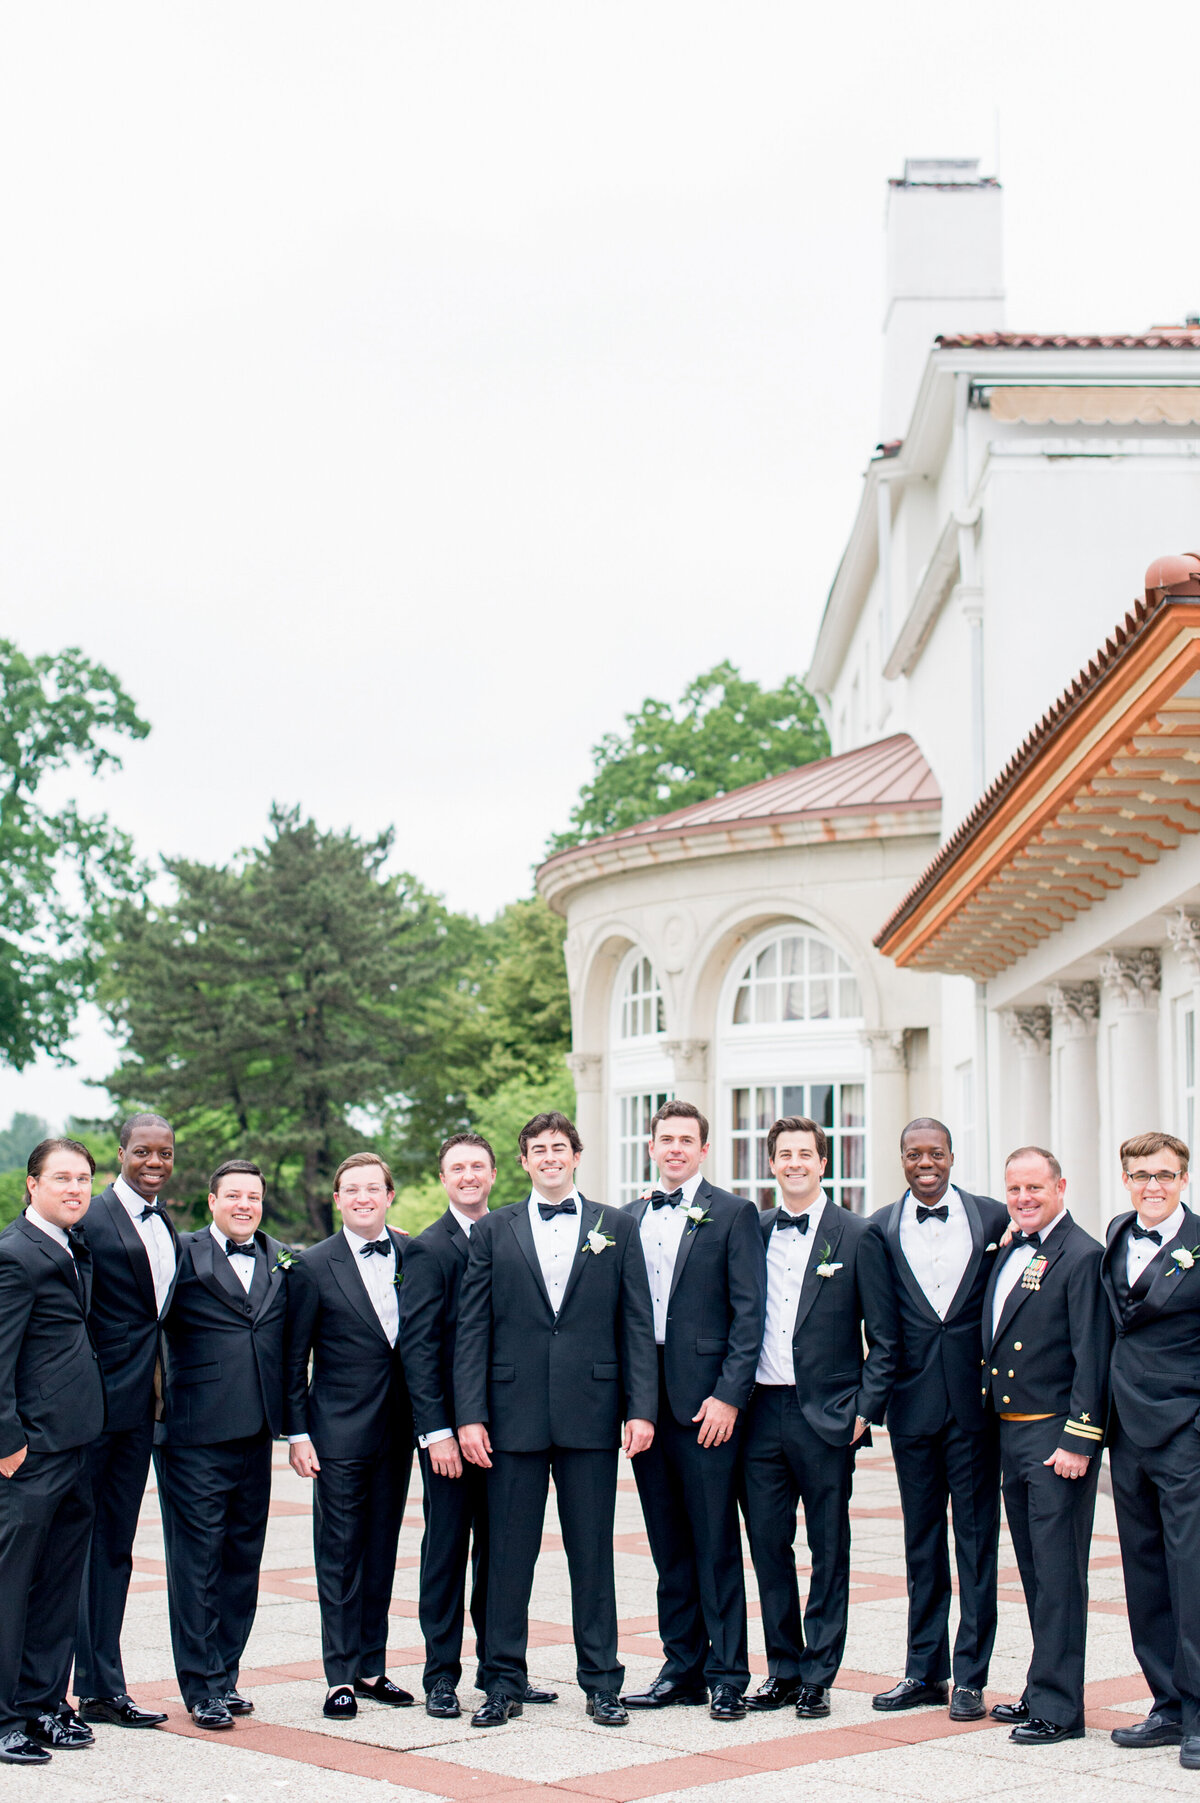 Groom and groomsmen at Congressional Country Club during luxury Washington DC wedding day